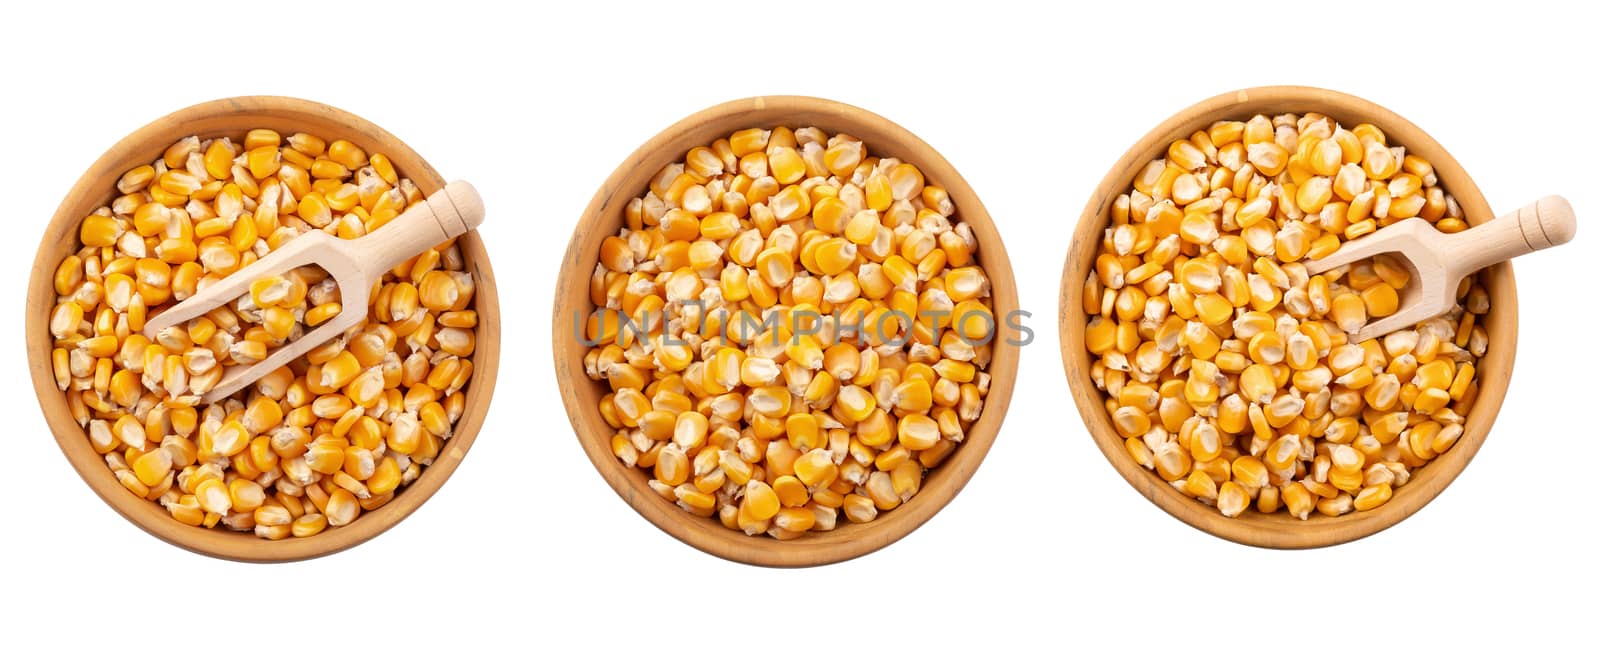 Corn seeds in a wooden bowl isolated on white background.